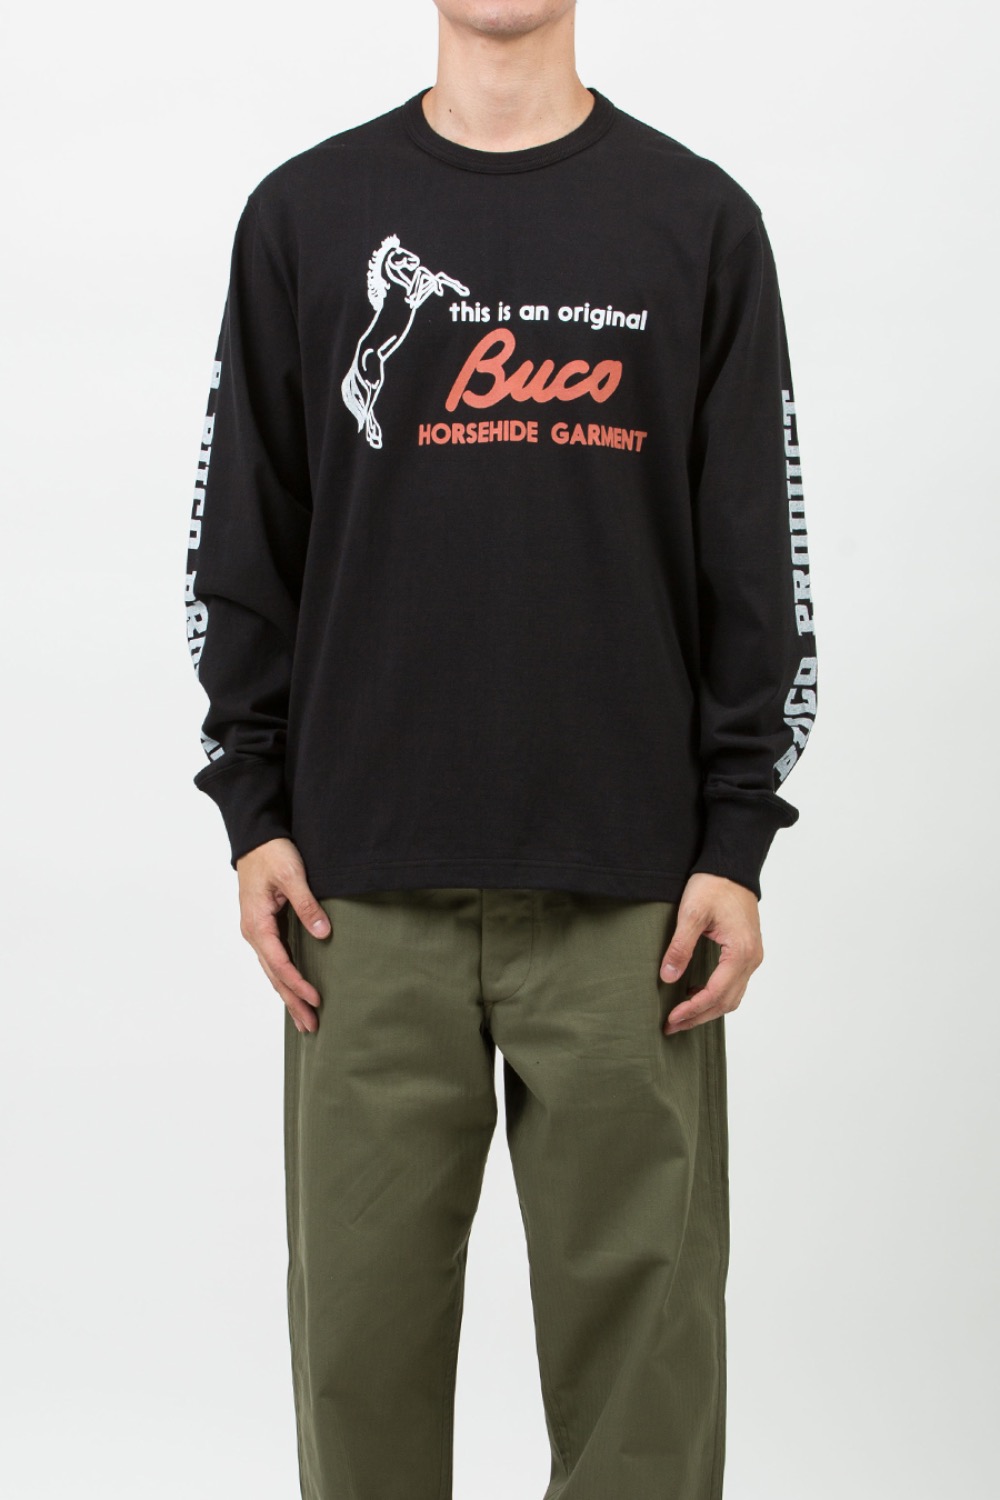 (23FW) BUCO L/S TEE / THIS IS AN ORIGINAL BUCO BLACK